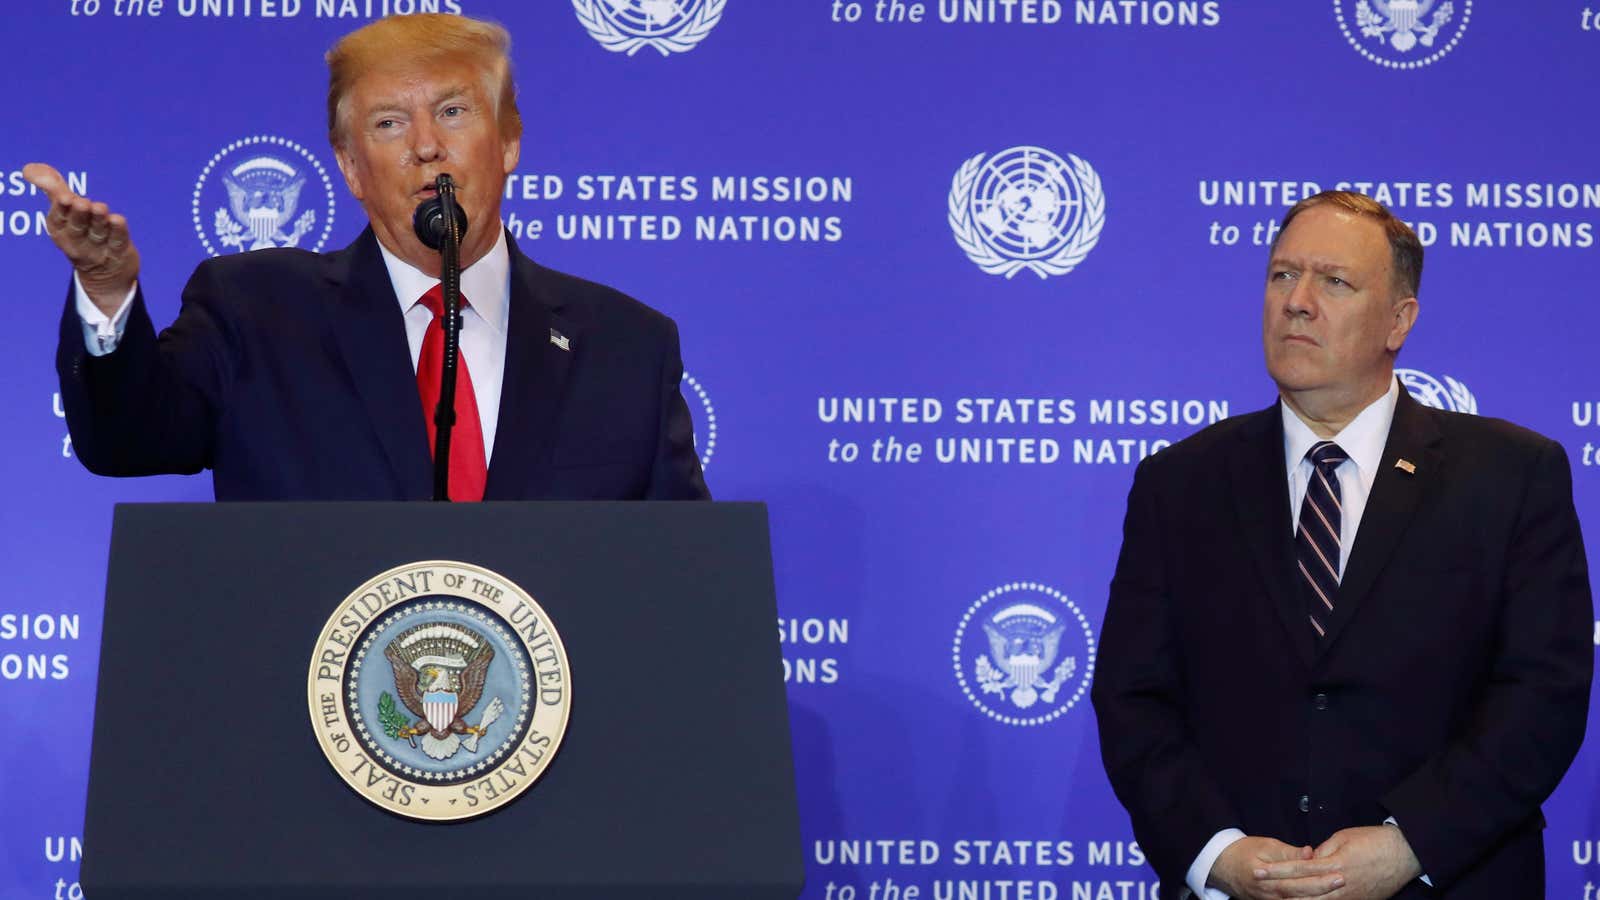 US president Donald Trump addresses a news conference with US secretary of State Mike Pompeo on the sidelines of the 74th session of the United Nations General Assembly (UNGA) in New York  Sept. 25, 2019.